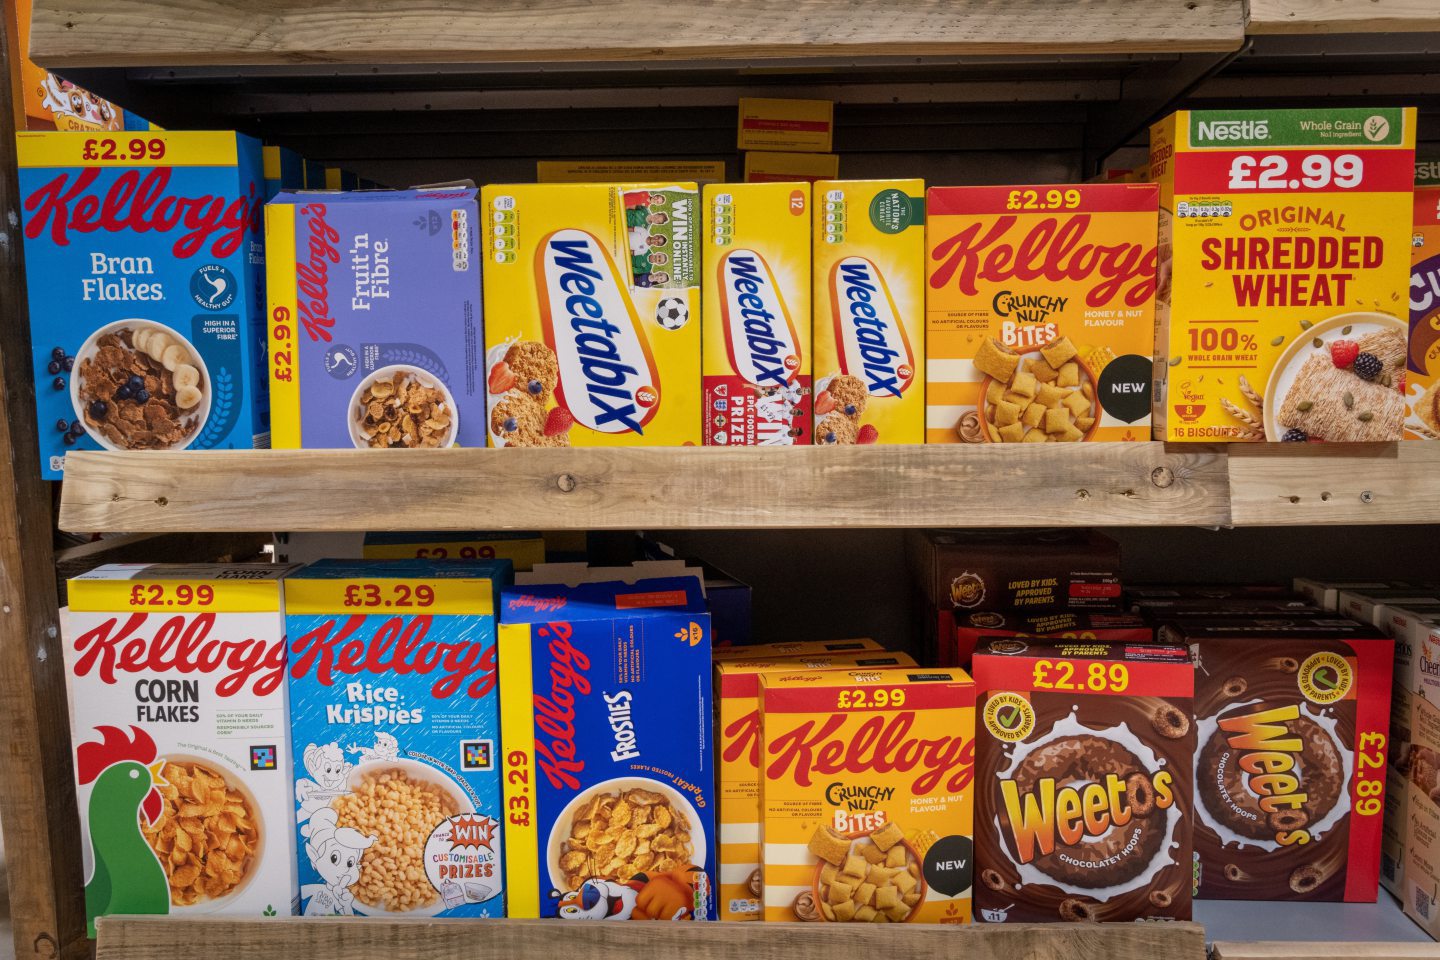 Own-brand cereals could be better for you. Image: Shutterstock / AmbrosiniV